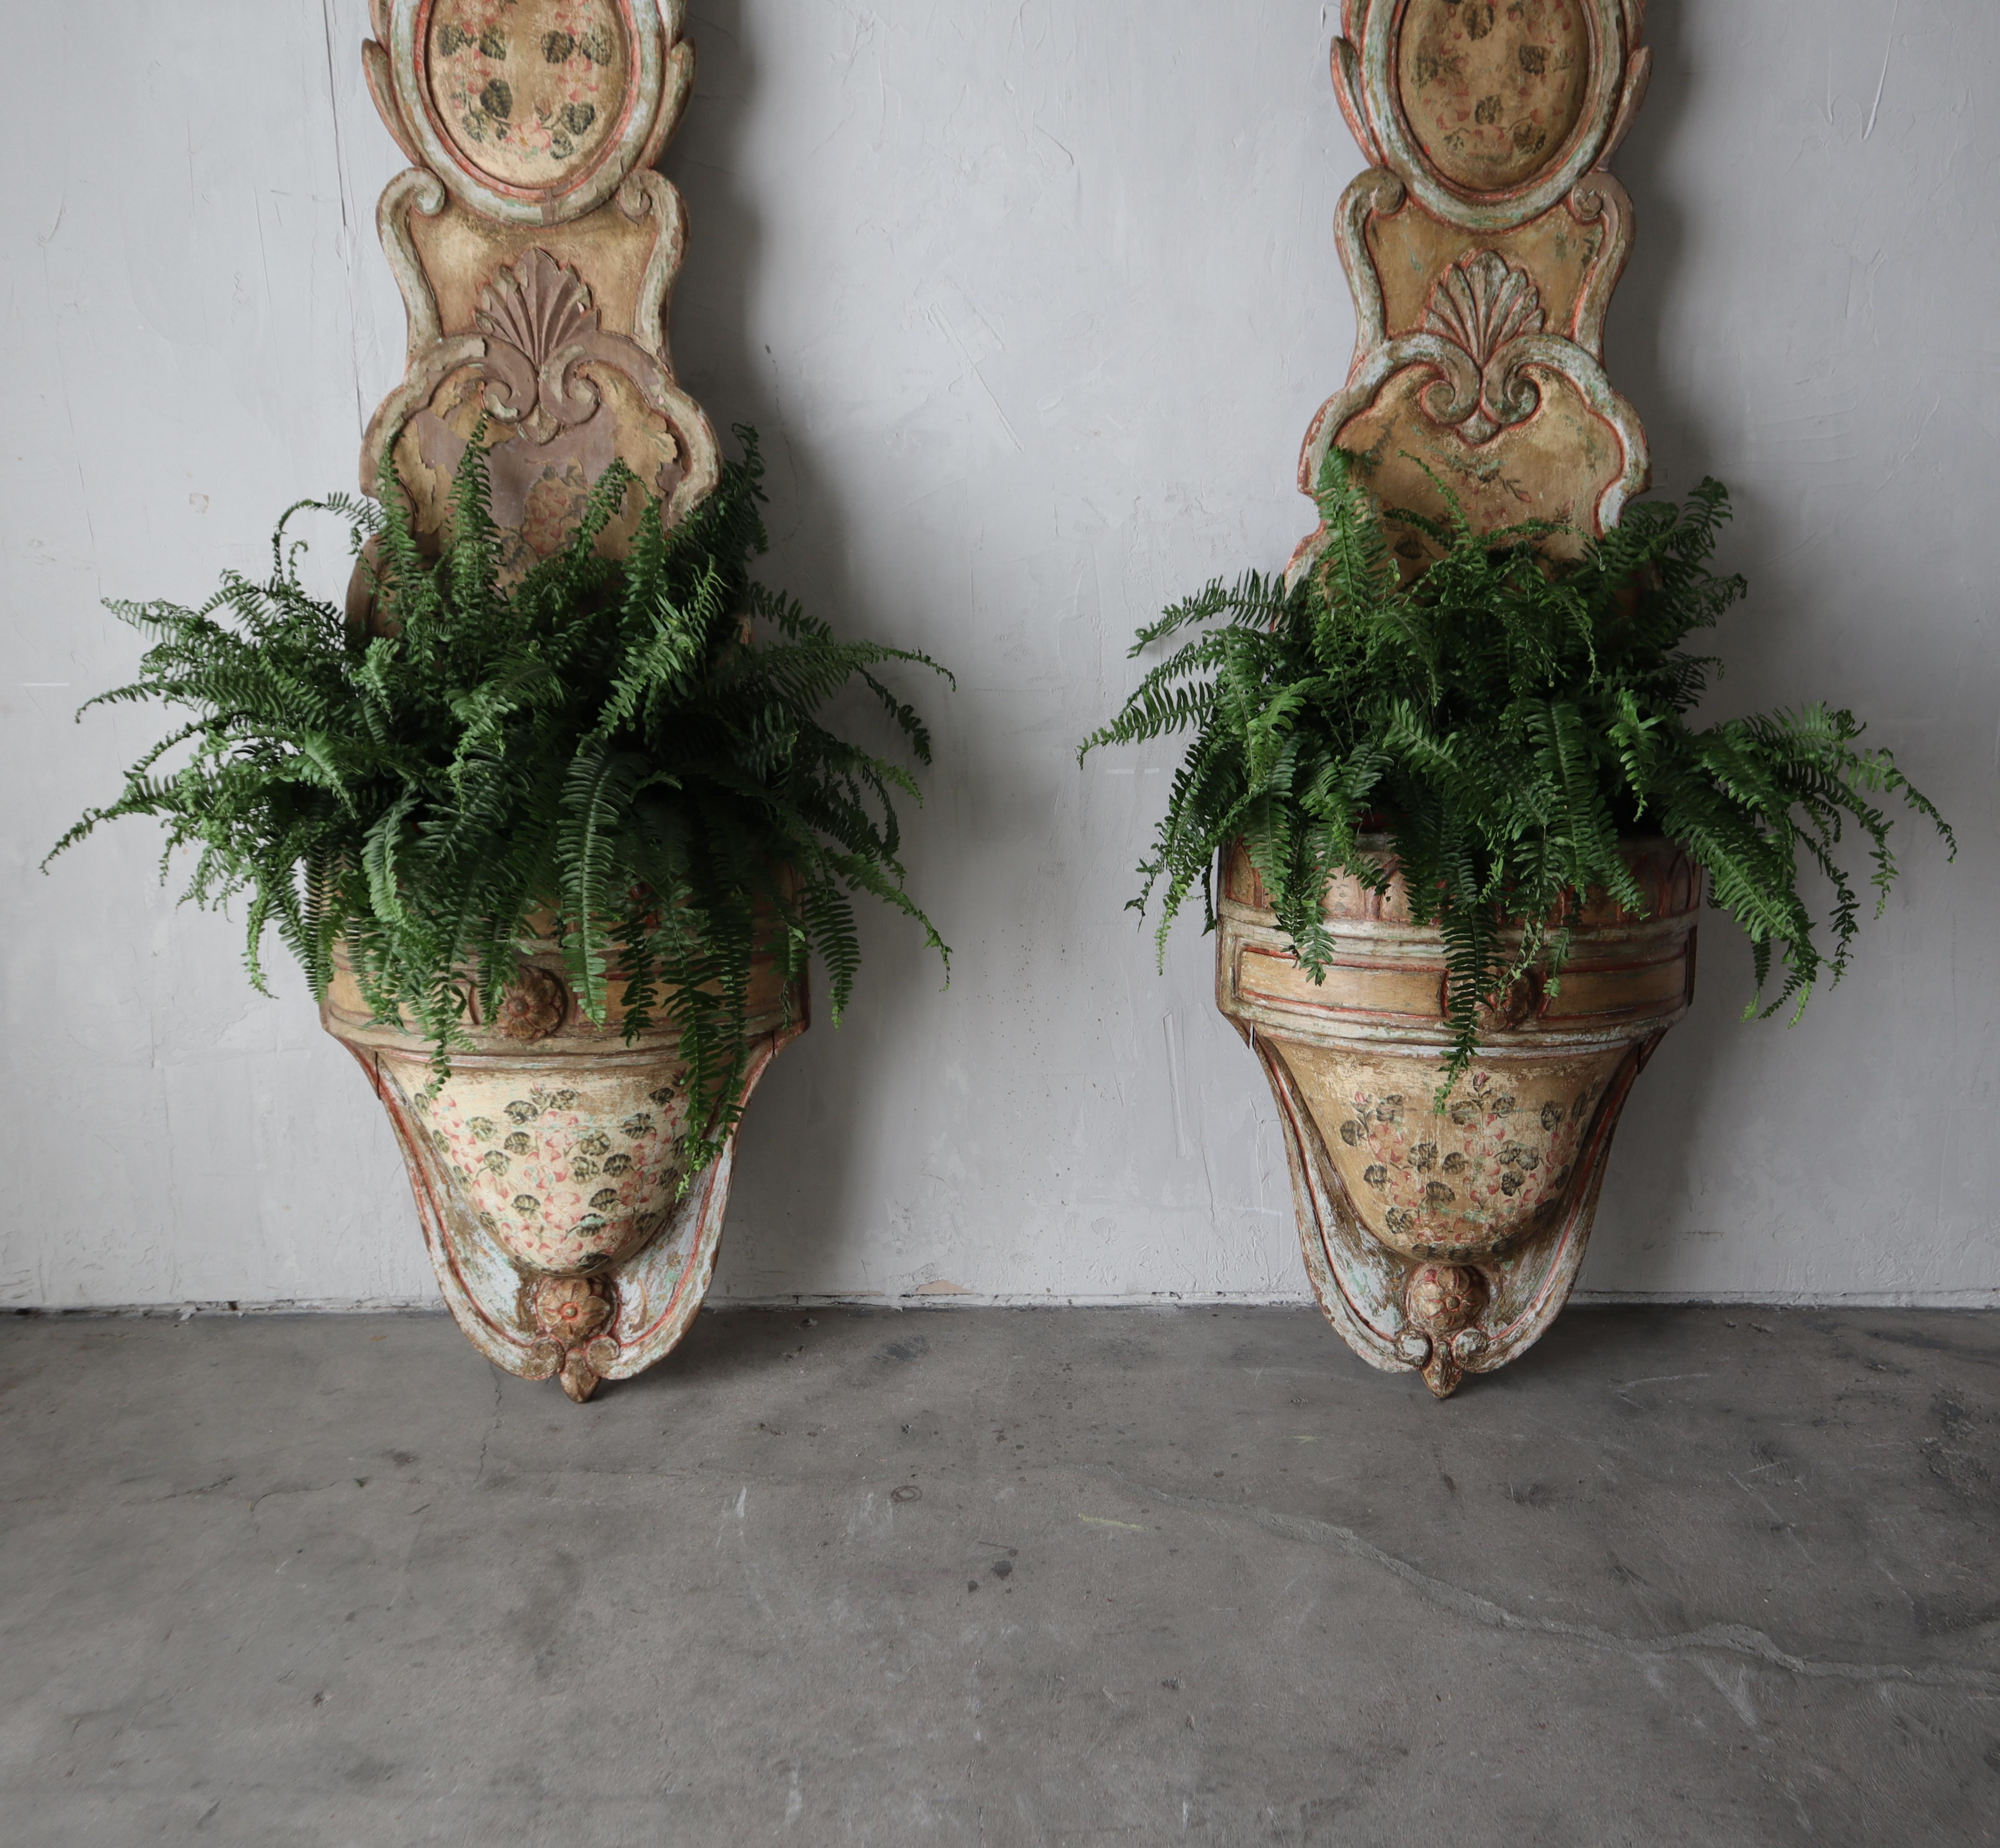 8ft Tall Pair of Antique European Wood Jardiniere Planters For Sale 2